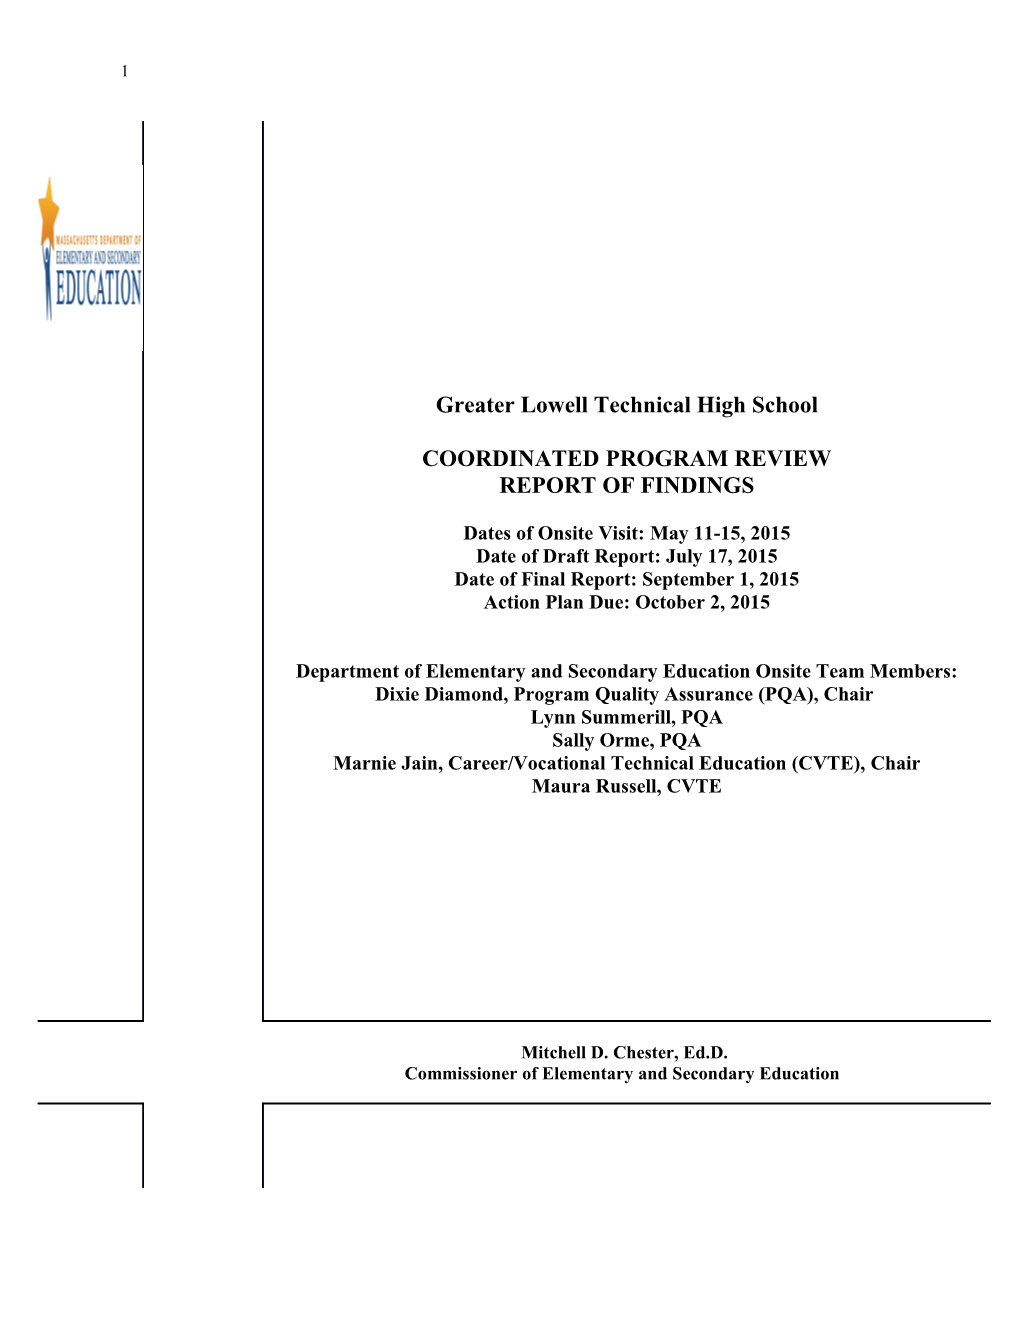 Greater Lowell RVTS CPR Final Report 2015